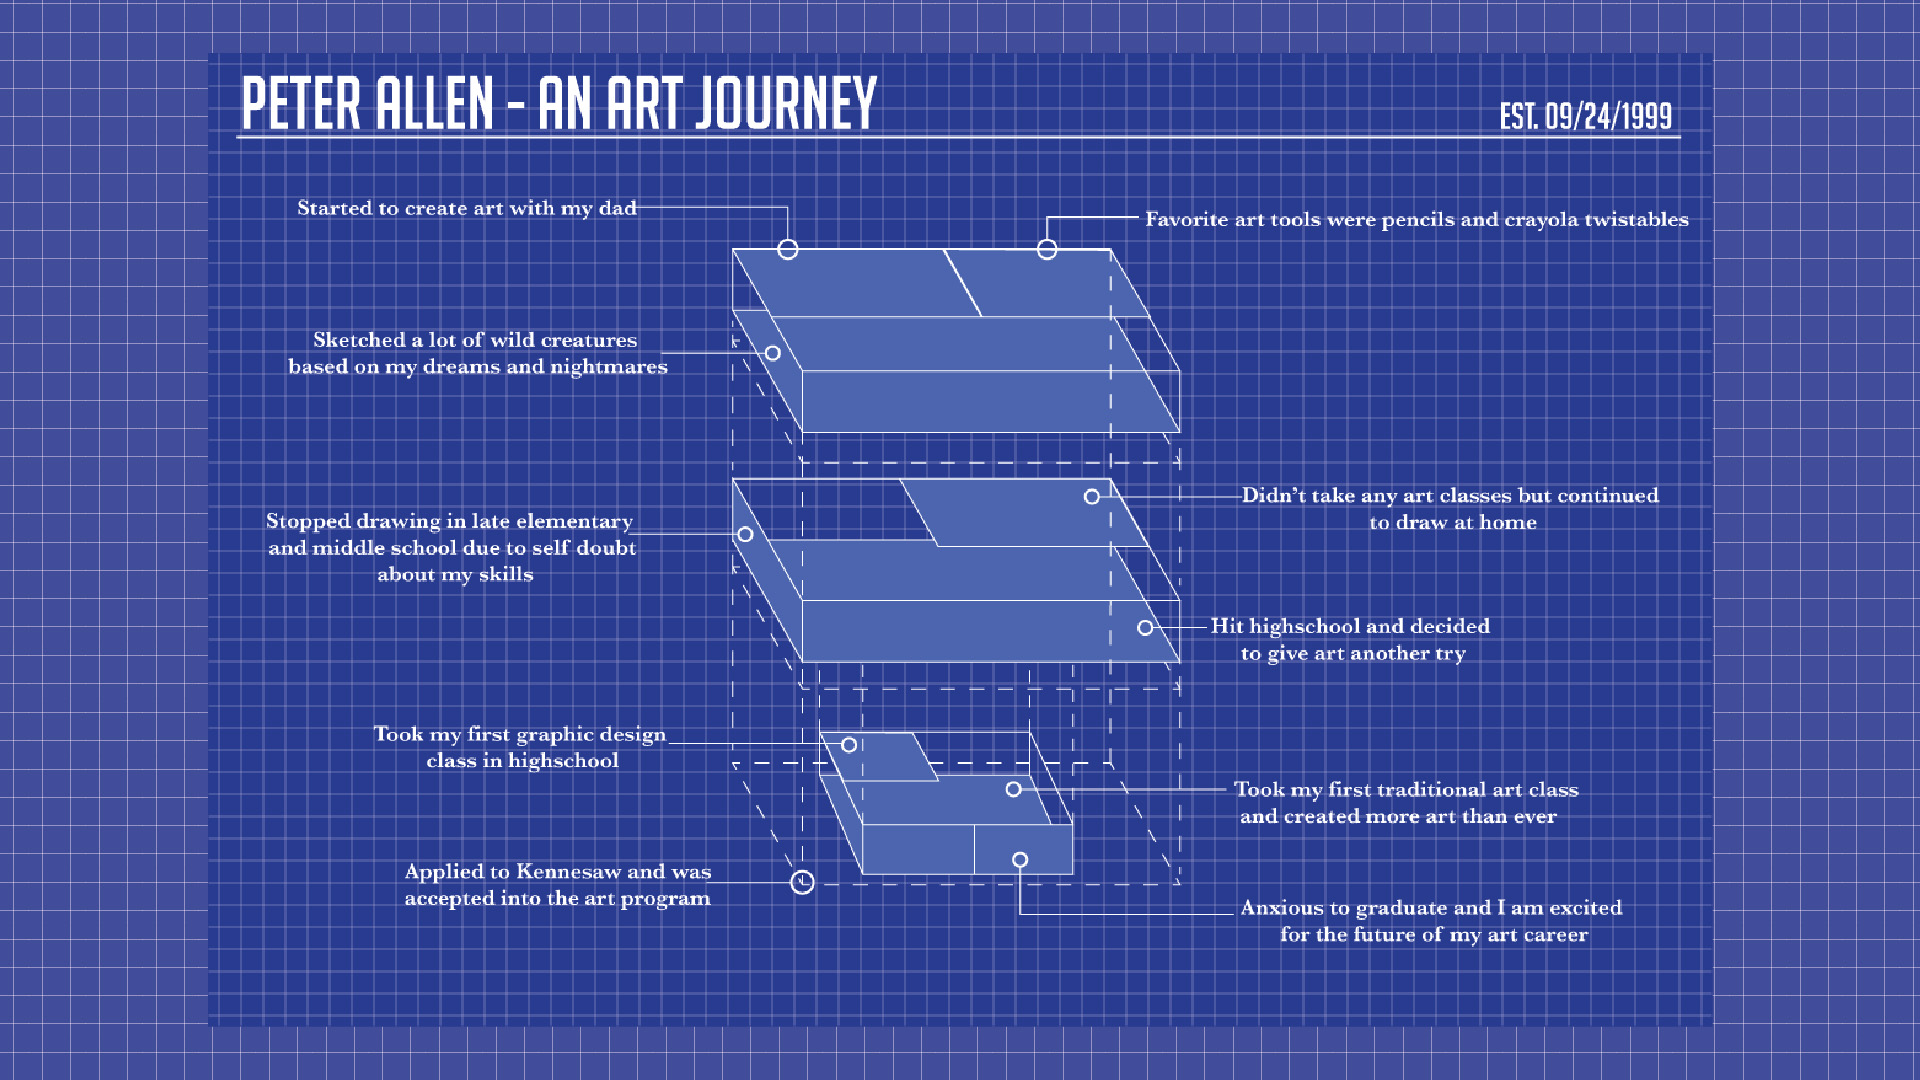 An Art Journey / An Art Journey, Journey Map, 17 x 11 inches print, 2022. This journey map explores my art journey from childhood to present day.